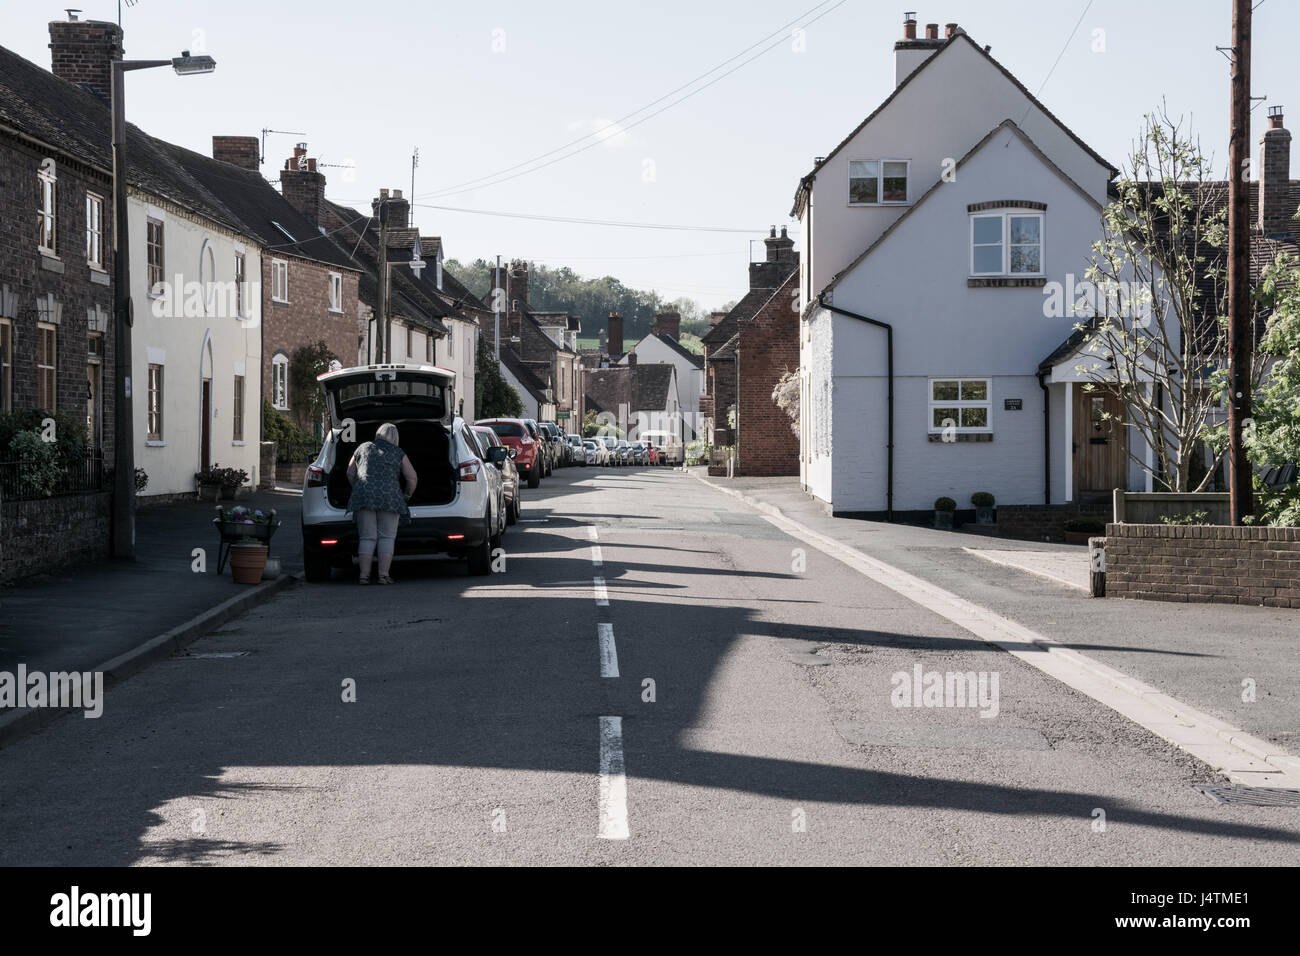 A sunny day on Barrow Street in Much Wenlock, Shropshire, UK.  A lazy Sunday afternoon and a scenic British road.. Stock Photo